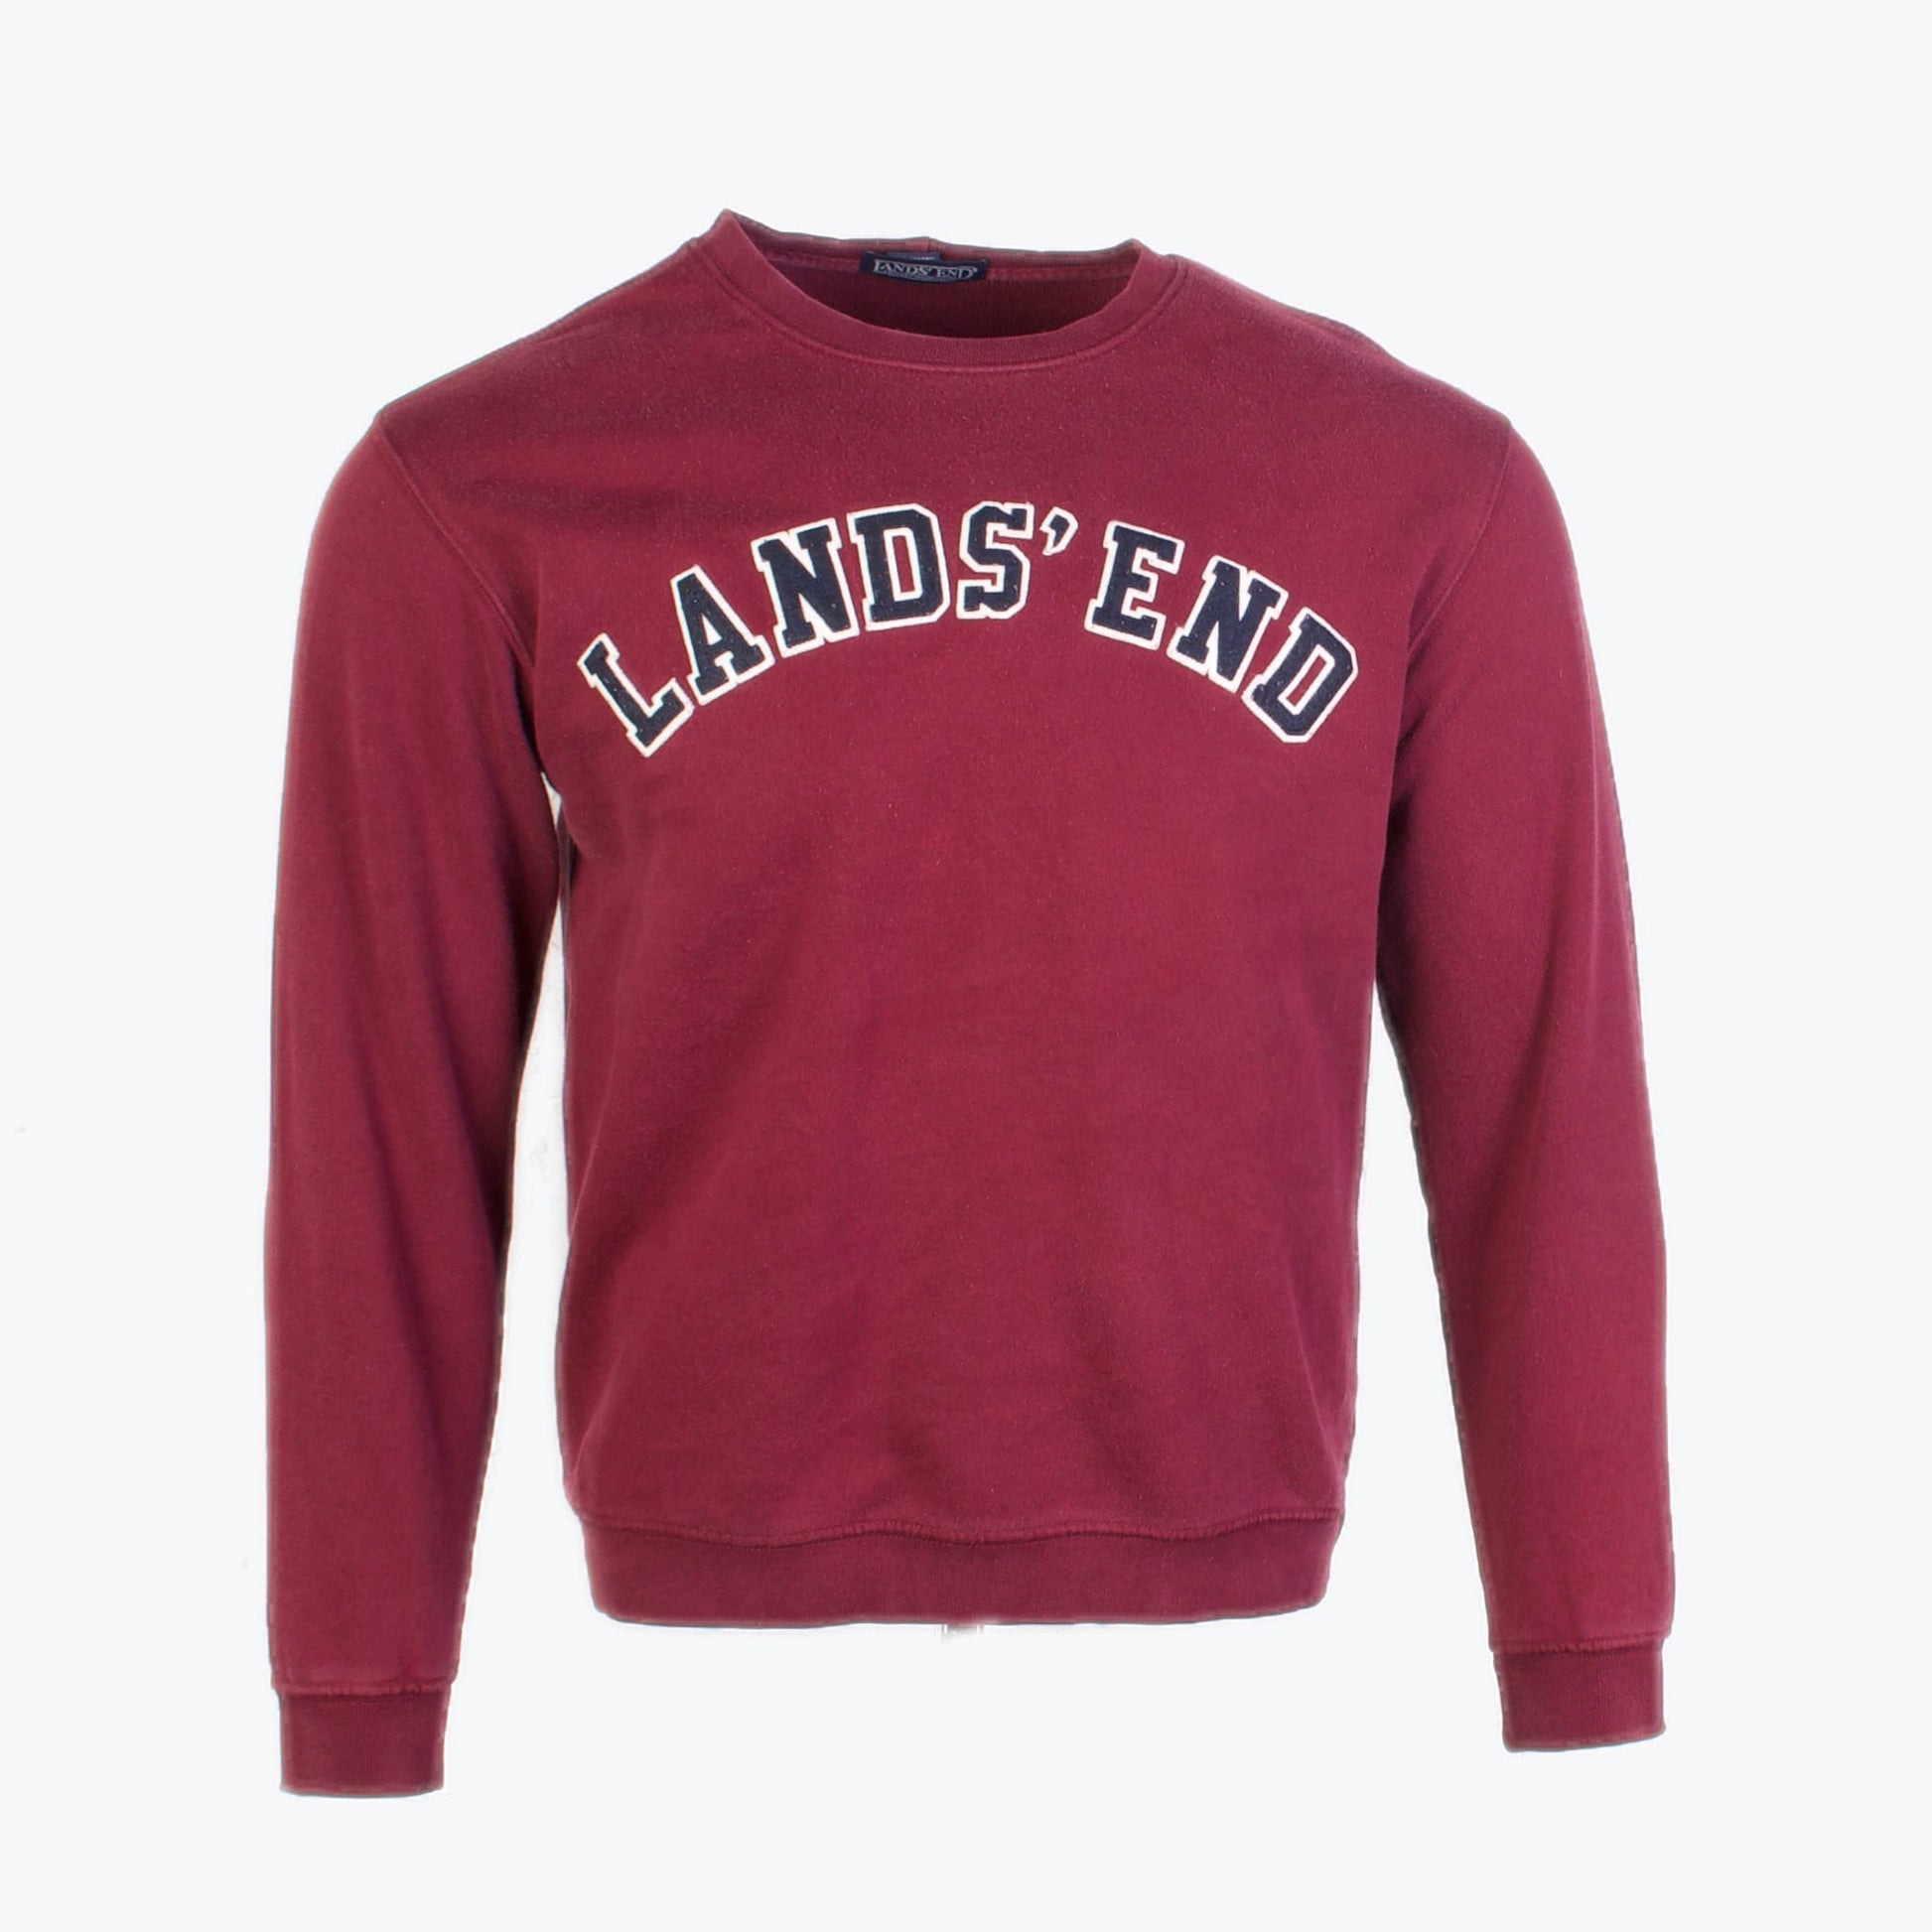 Vintage 'Lands' End' Graphic Sweatshirt - Red - American Madness